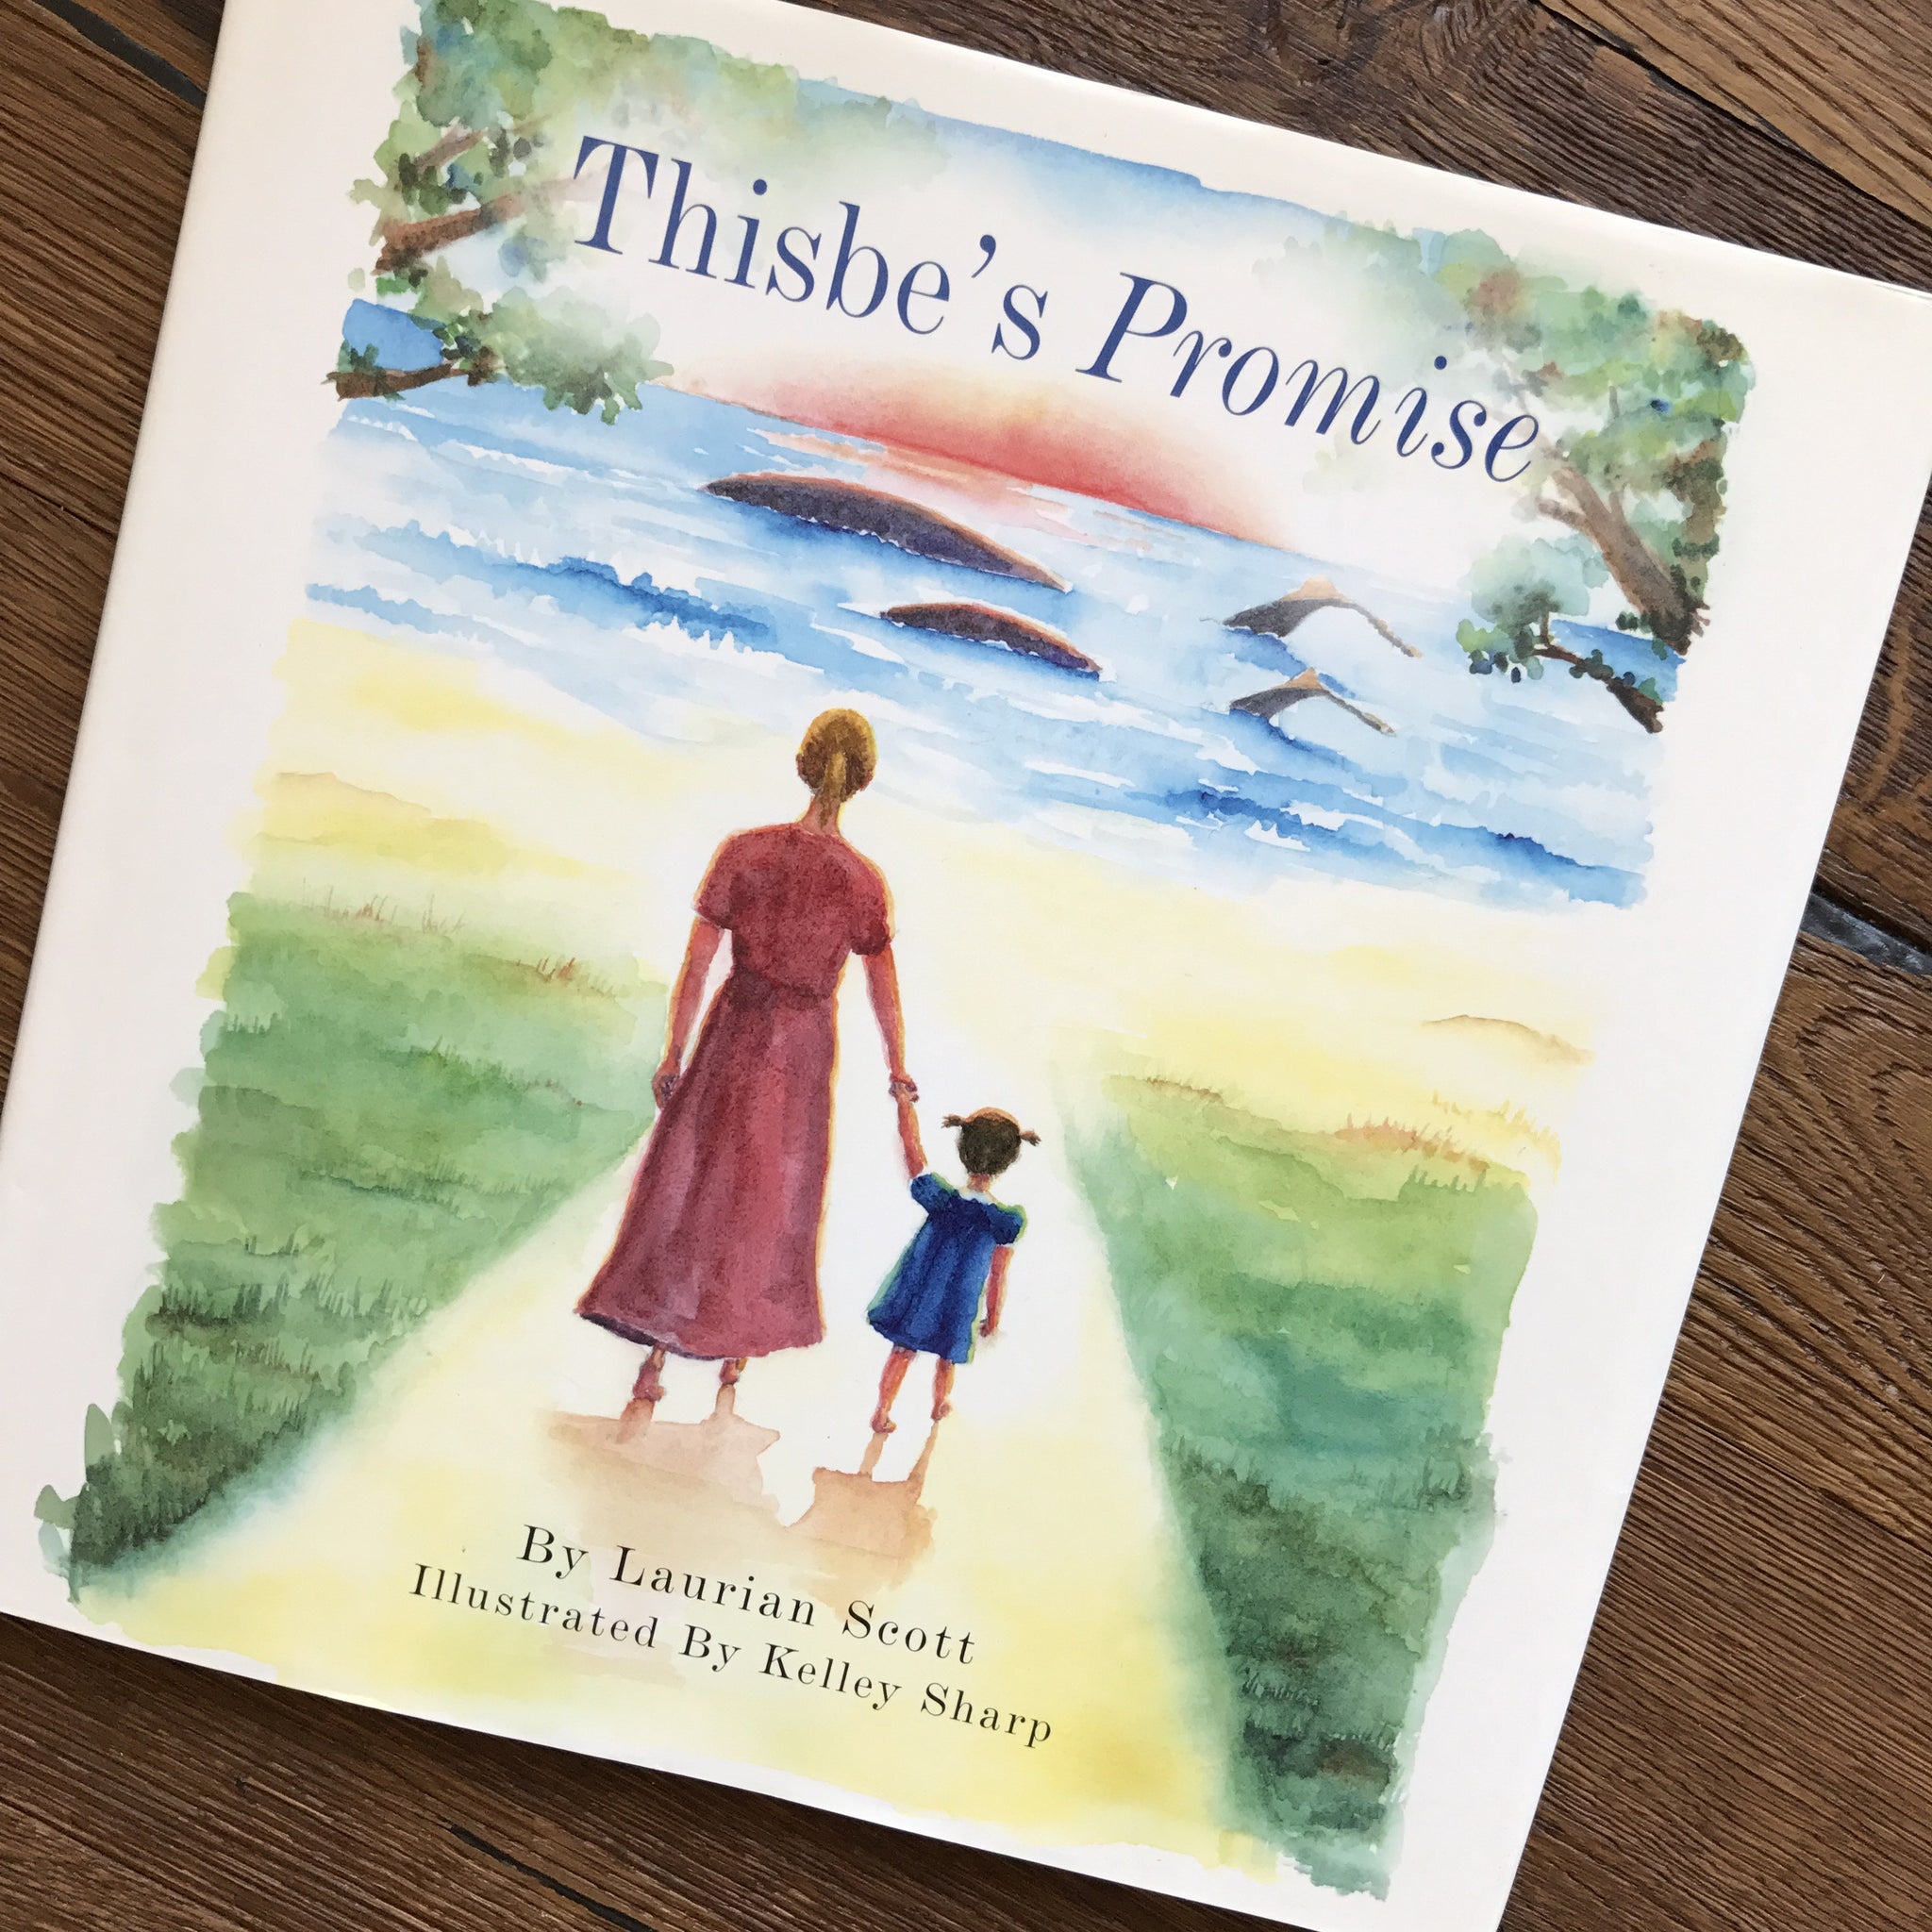 BOOK - THISBE'S PROMISE BY LAURIAN SCOTT